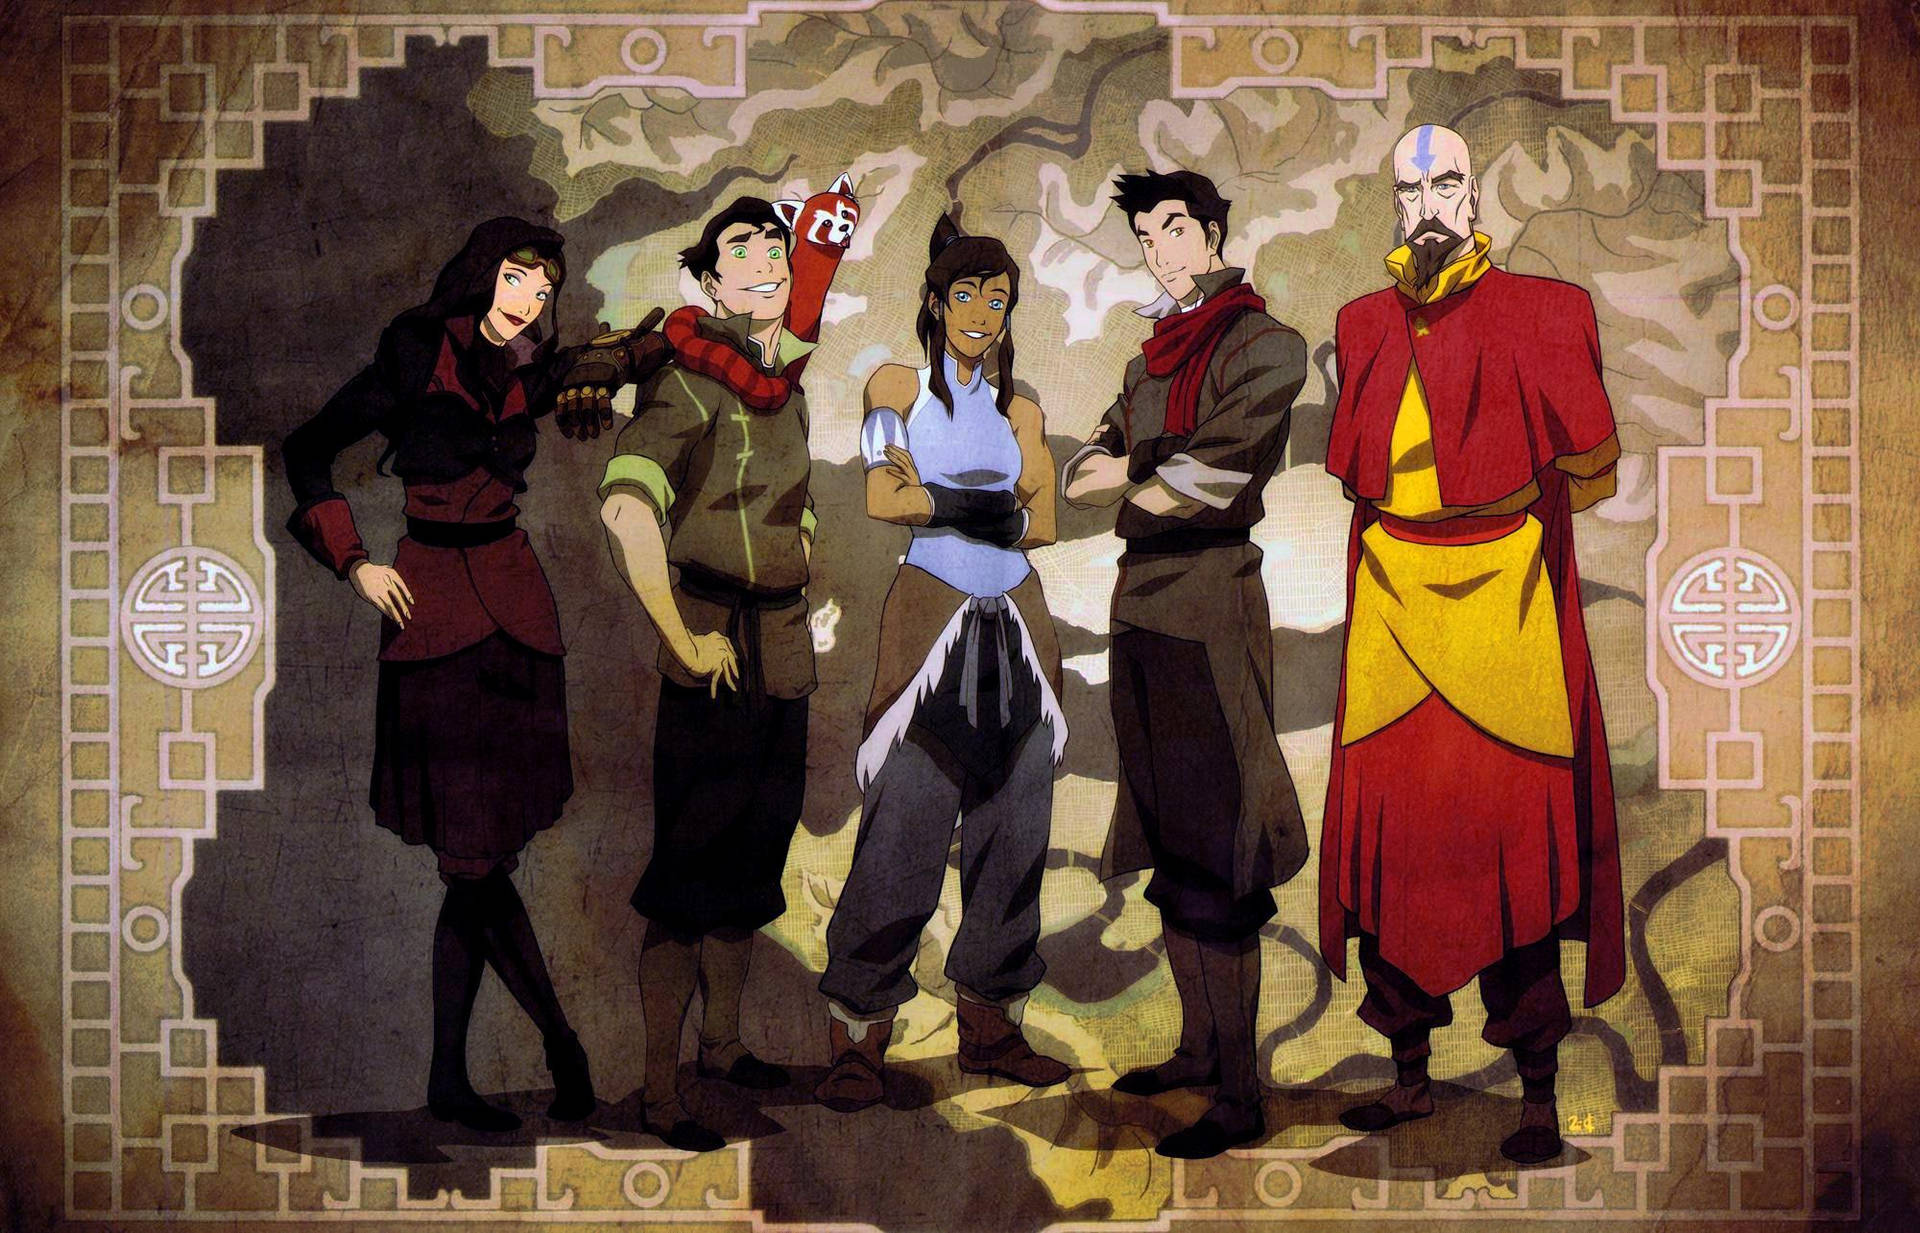 Aang, the Avatar and protector of the four nations and Korra, the powerful successor to Aang Wallpaper